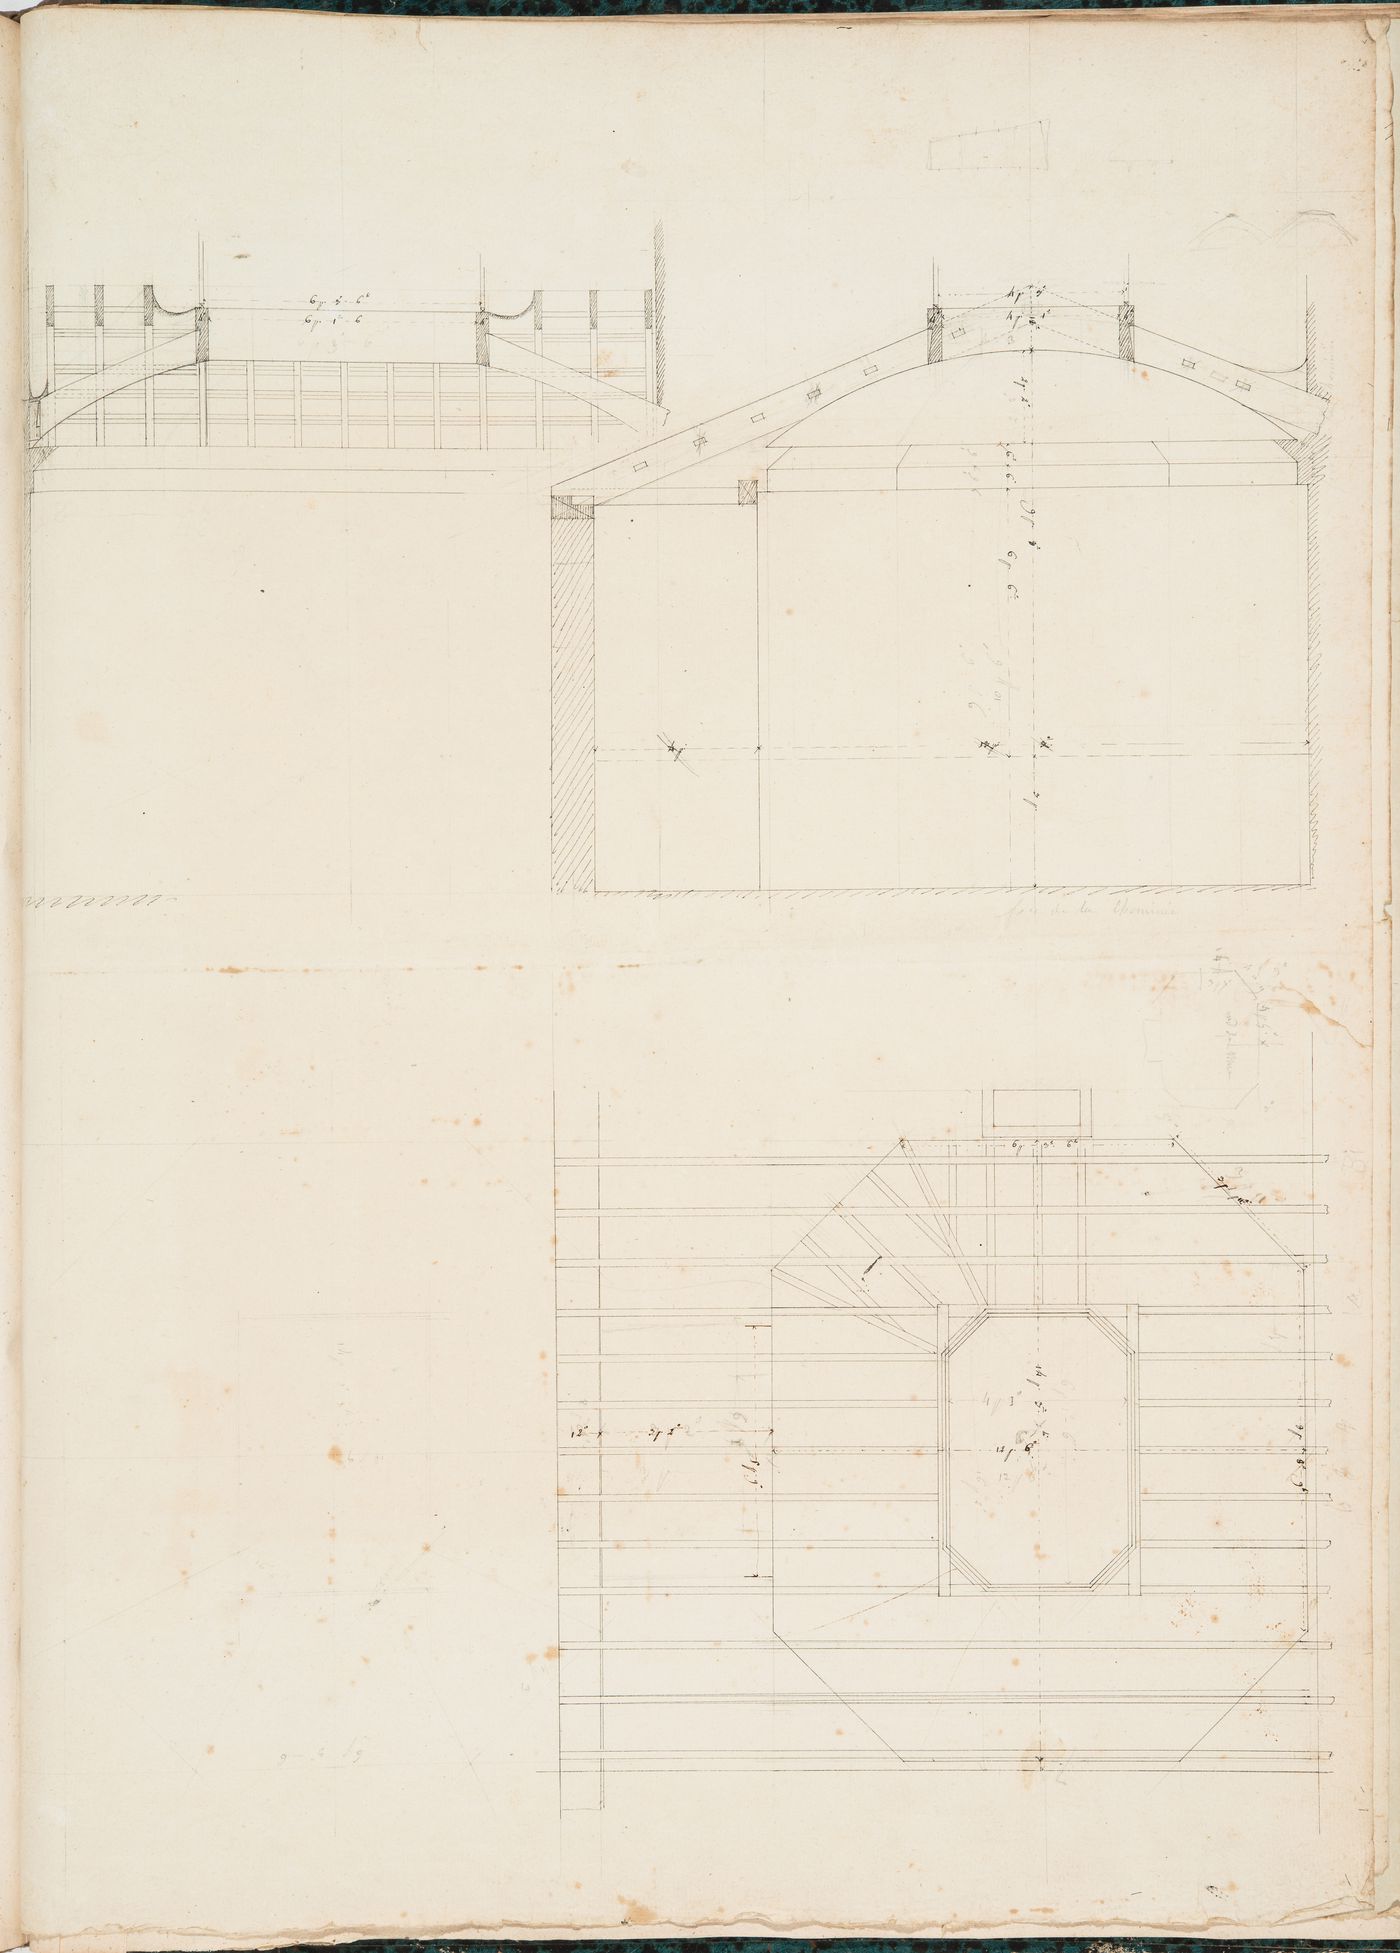 Project for renovations for a house for M. le Dhuy: Sections and plan showing the wood framing for the boudoir